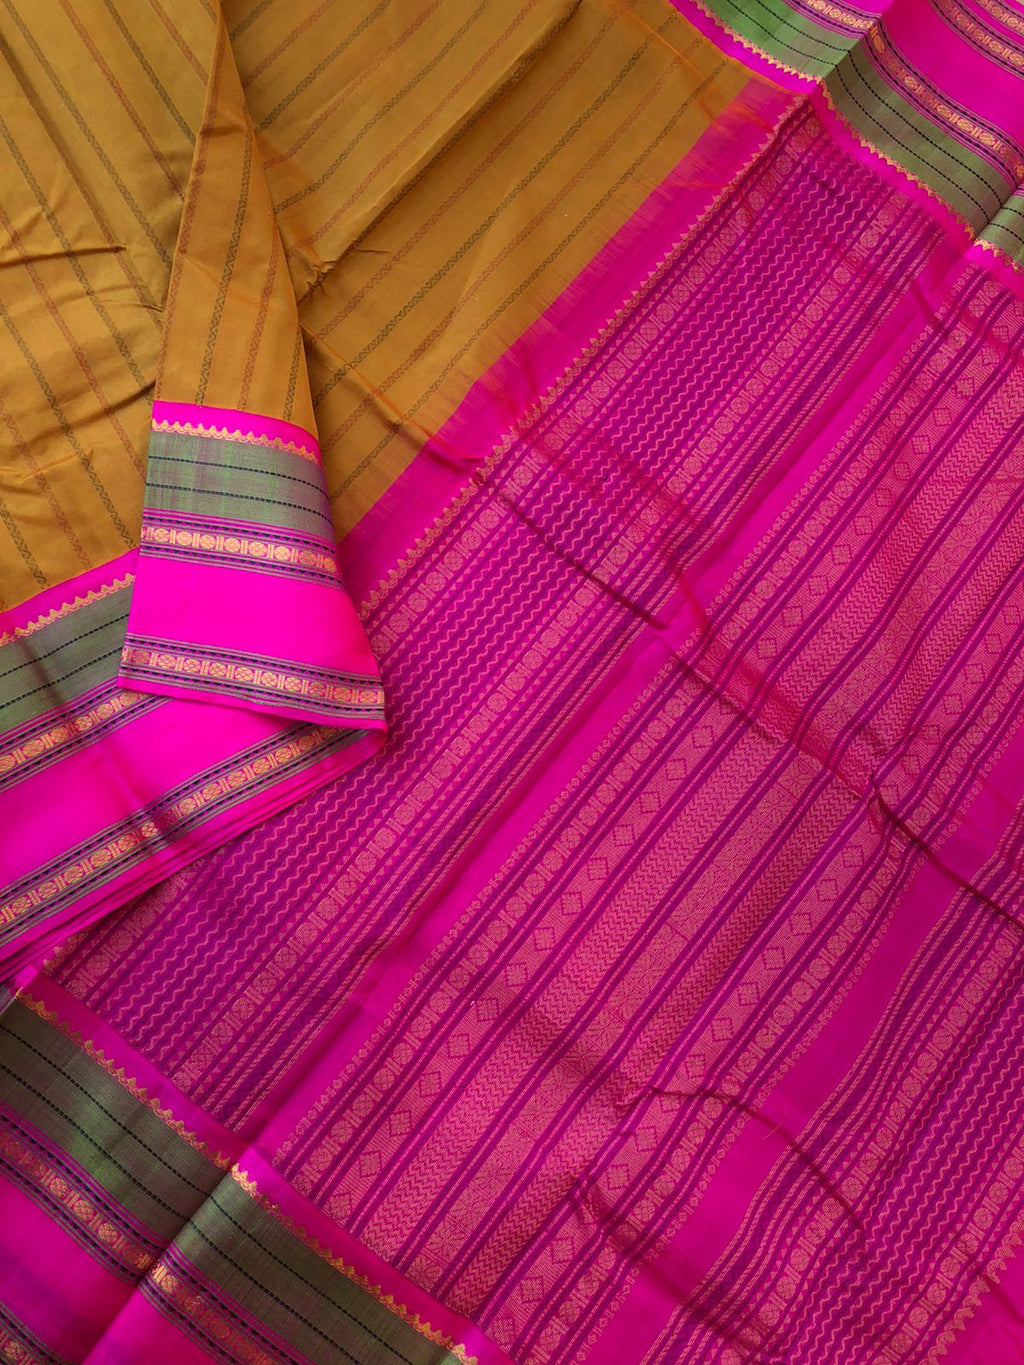 Divyam - Korvai Silk Cotton with Pure Silk Woven Borders - olden mustard and pink